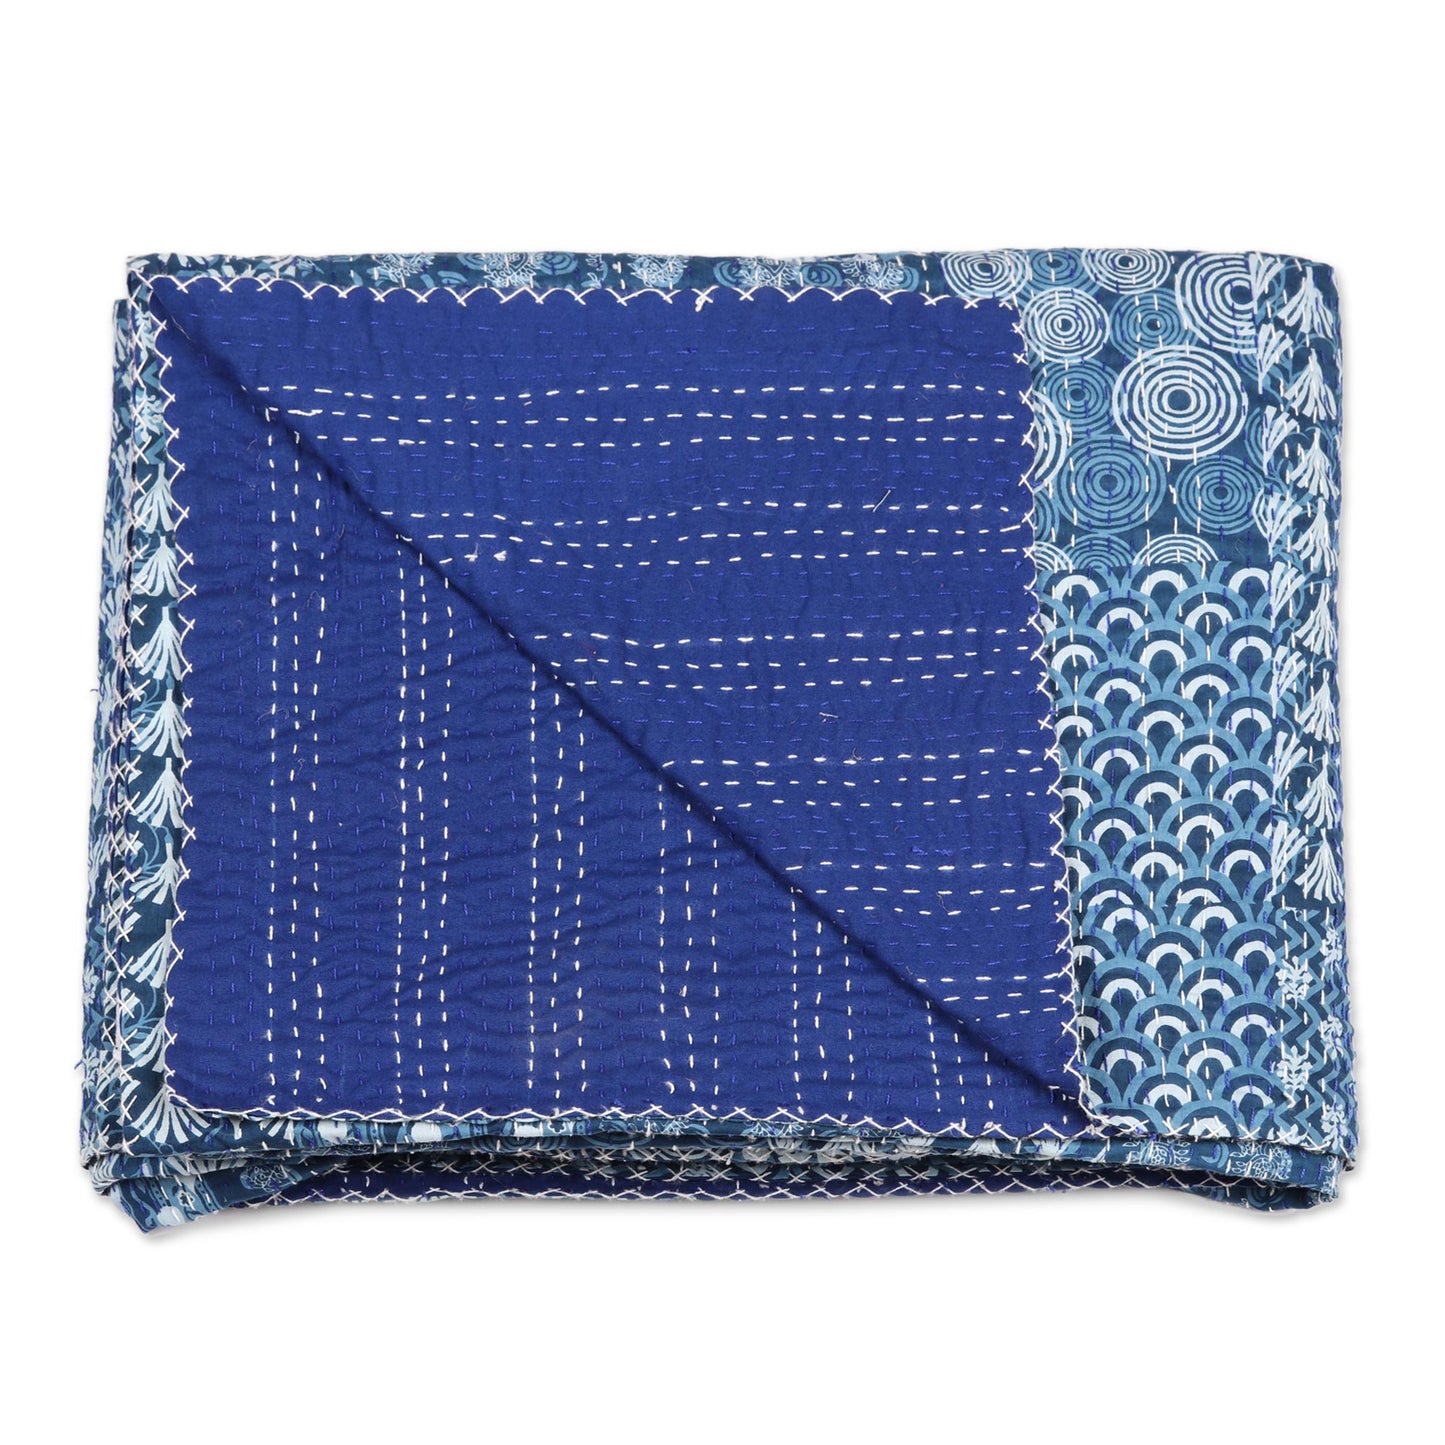 Kantha Charm in Blue Blue and White Cotton Kantha Bedspread and Shams (3 Piece)